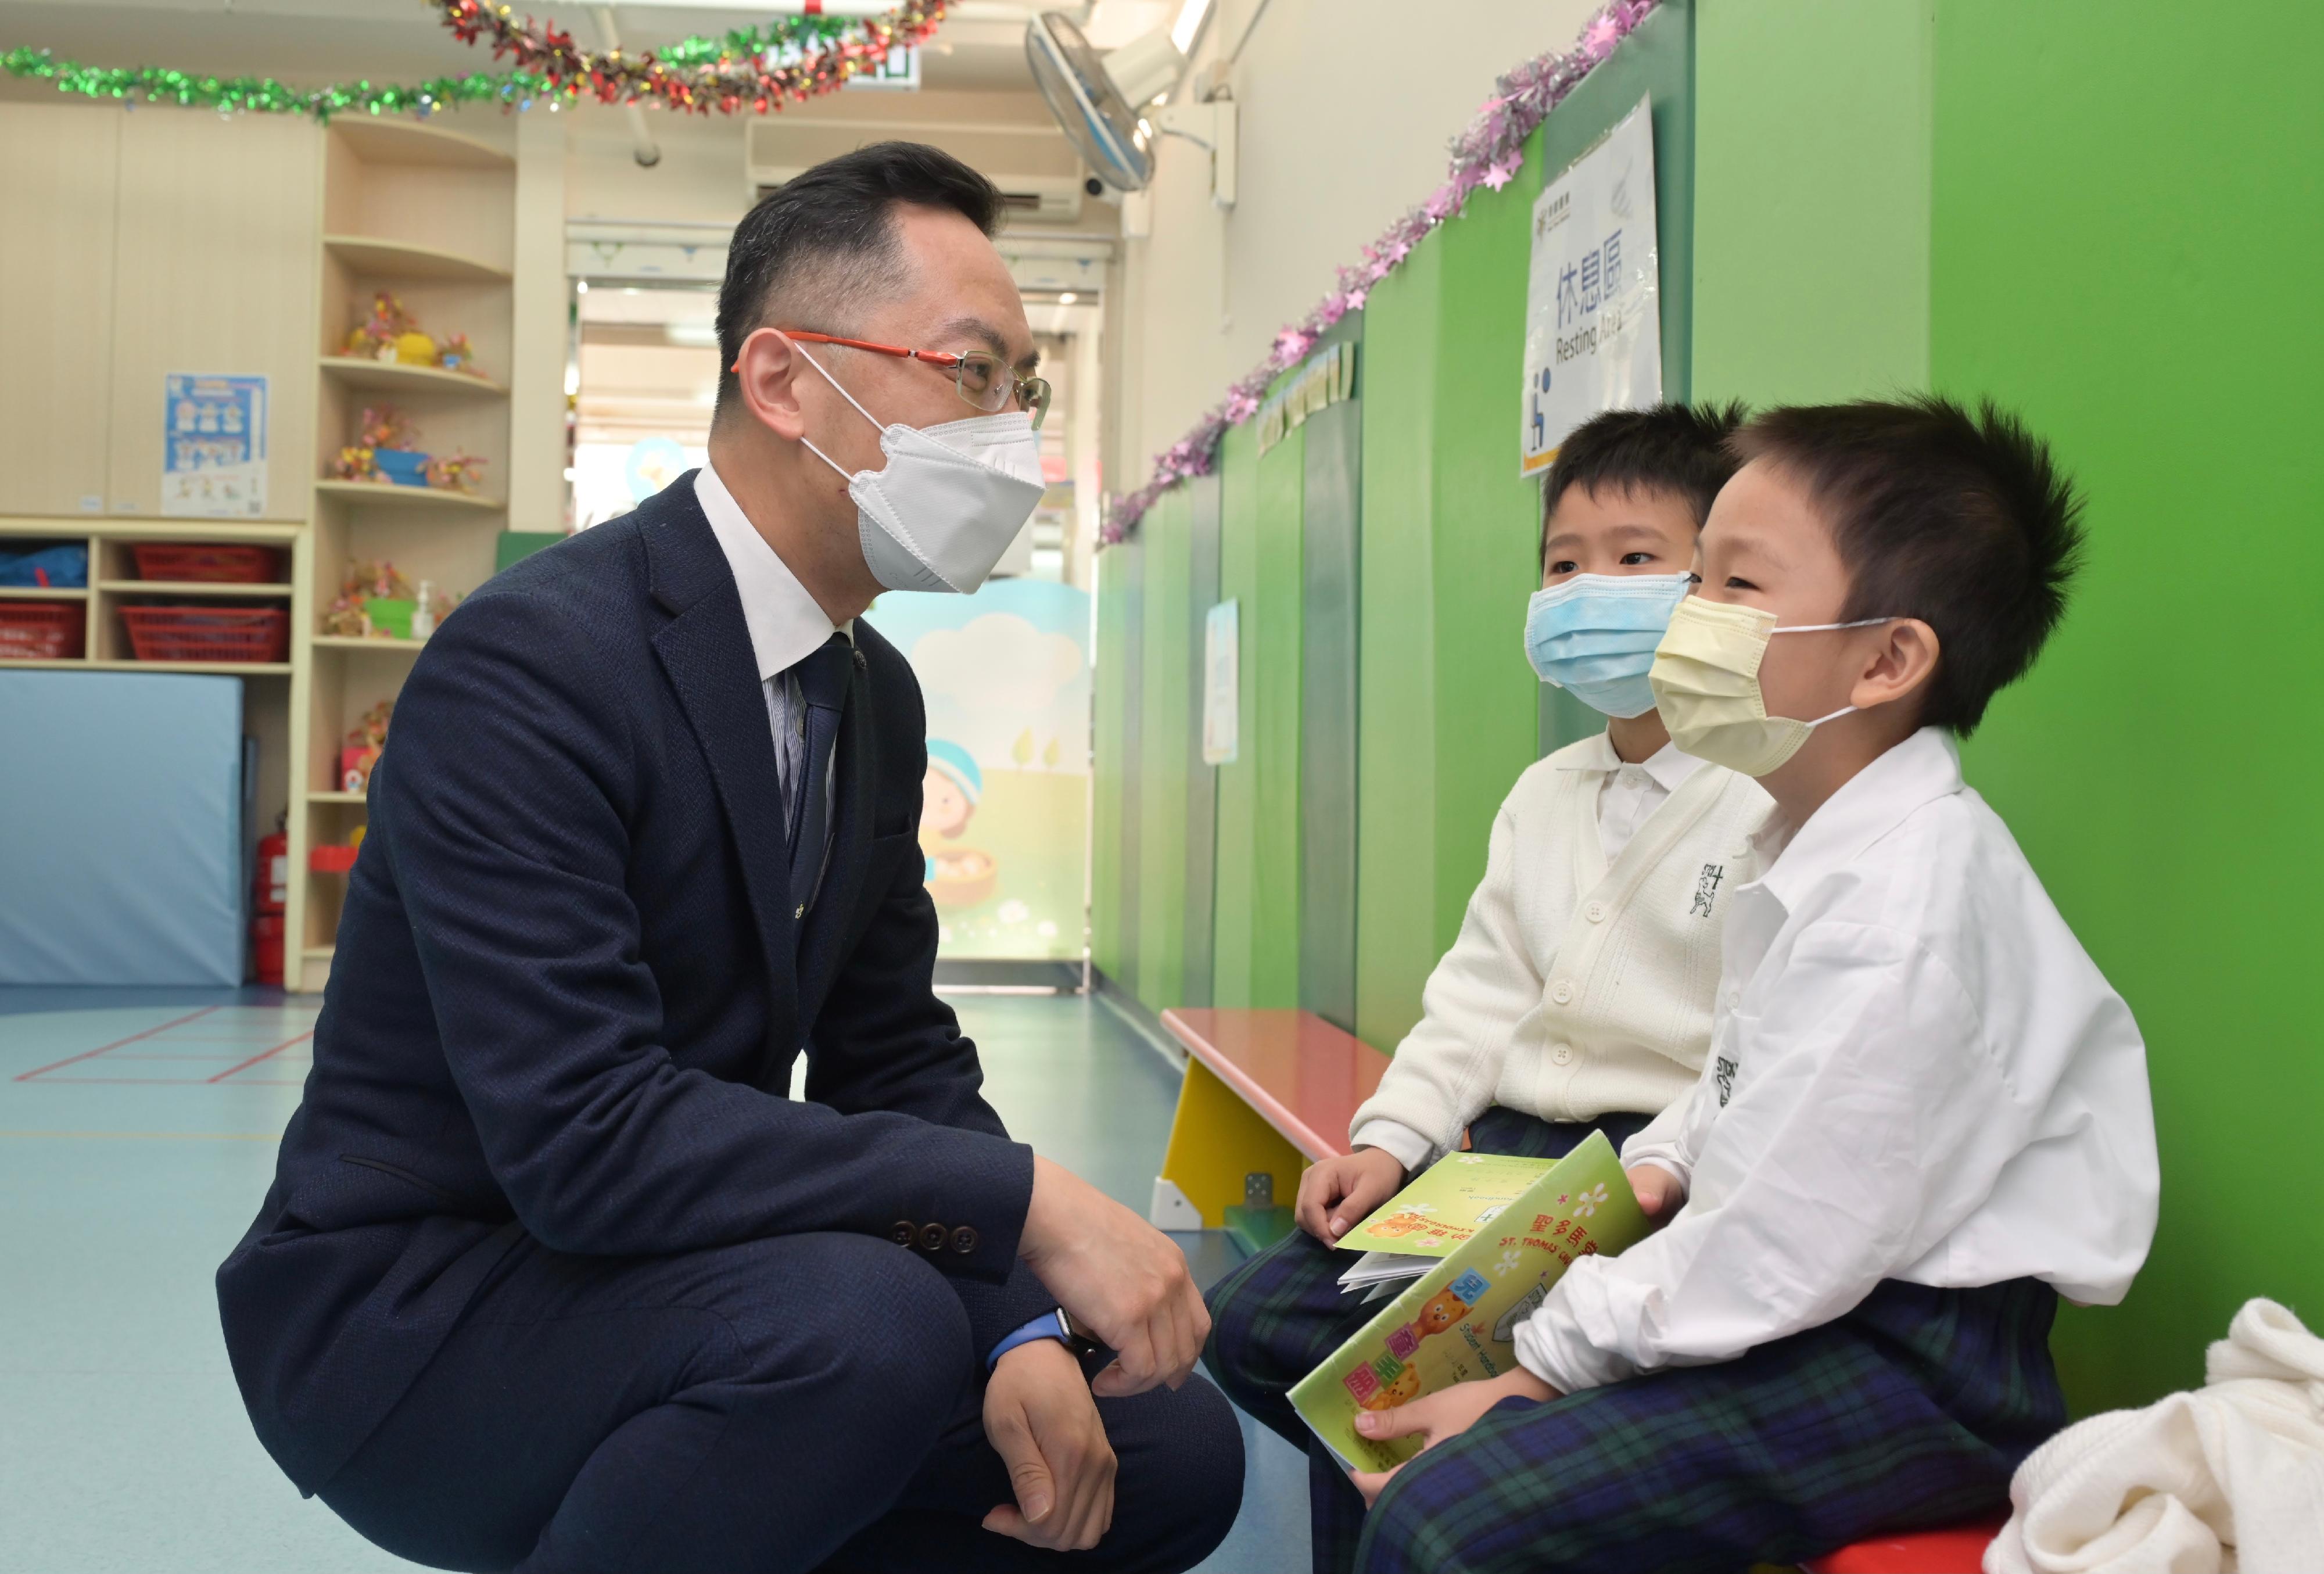 The Director of Health, Dr Ronald Lam, and the Controller of the Centre for Health Protection of the Department of Health, Dr Edwin Tsui, this morning (December 15) visited St Thomas' Church Kindergarten in Shek Kip Mei to view the implementation of the school outreach seasonal influenza vaccination service. Photo shows Dr Lam (left) chatting with pupils who have just been vaccinated.